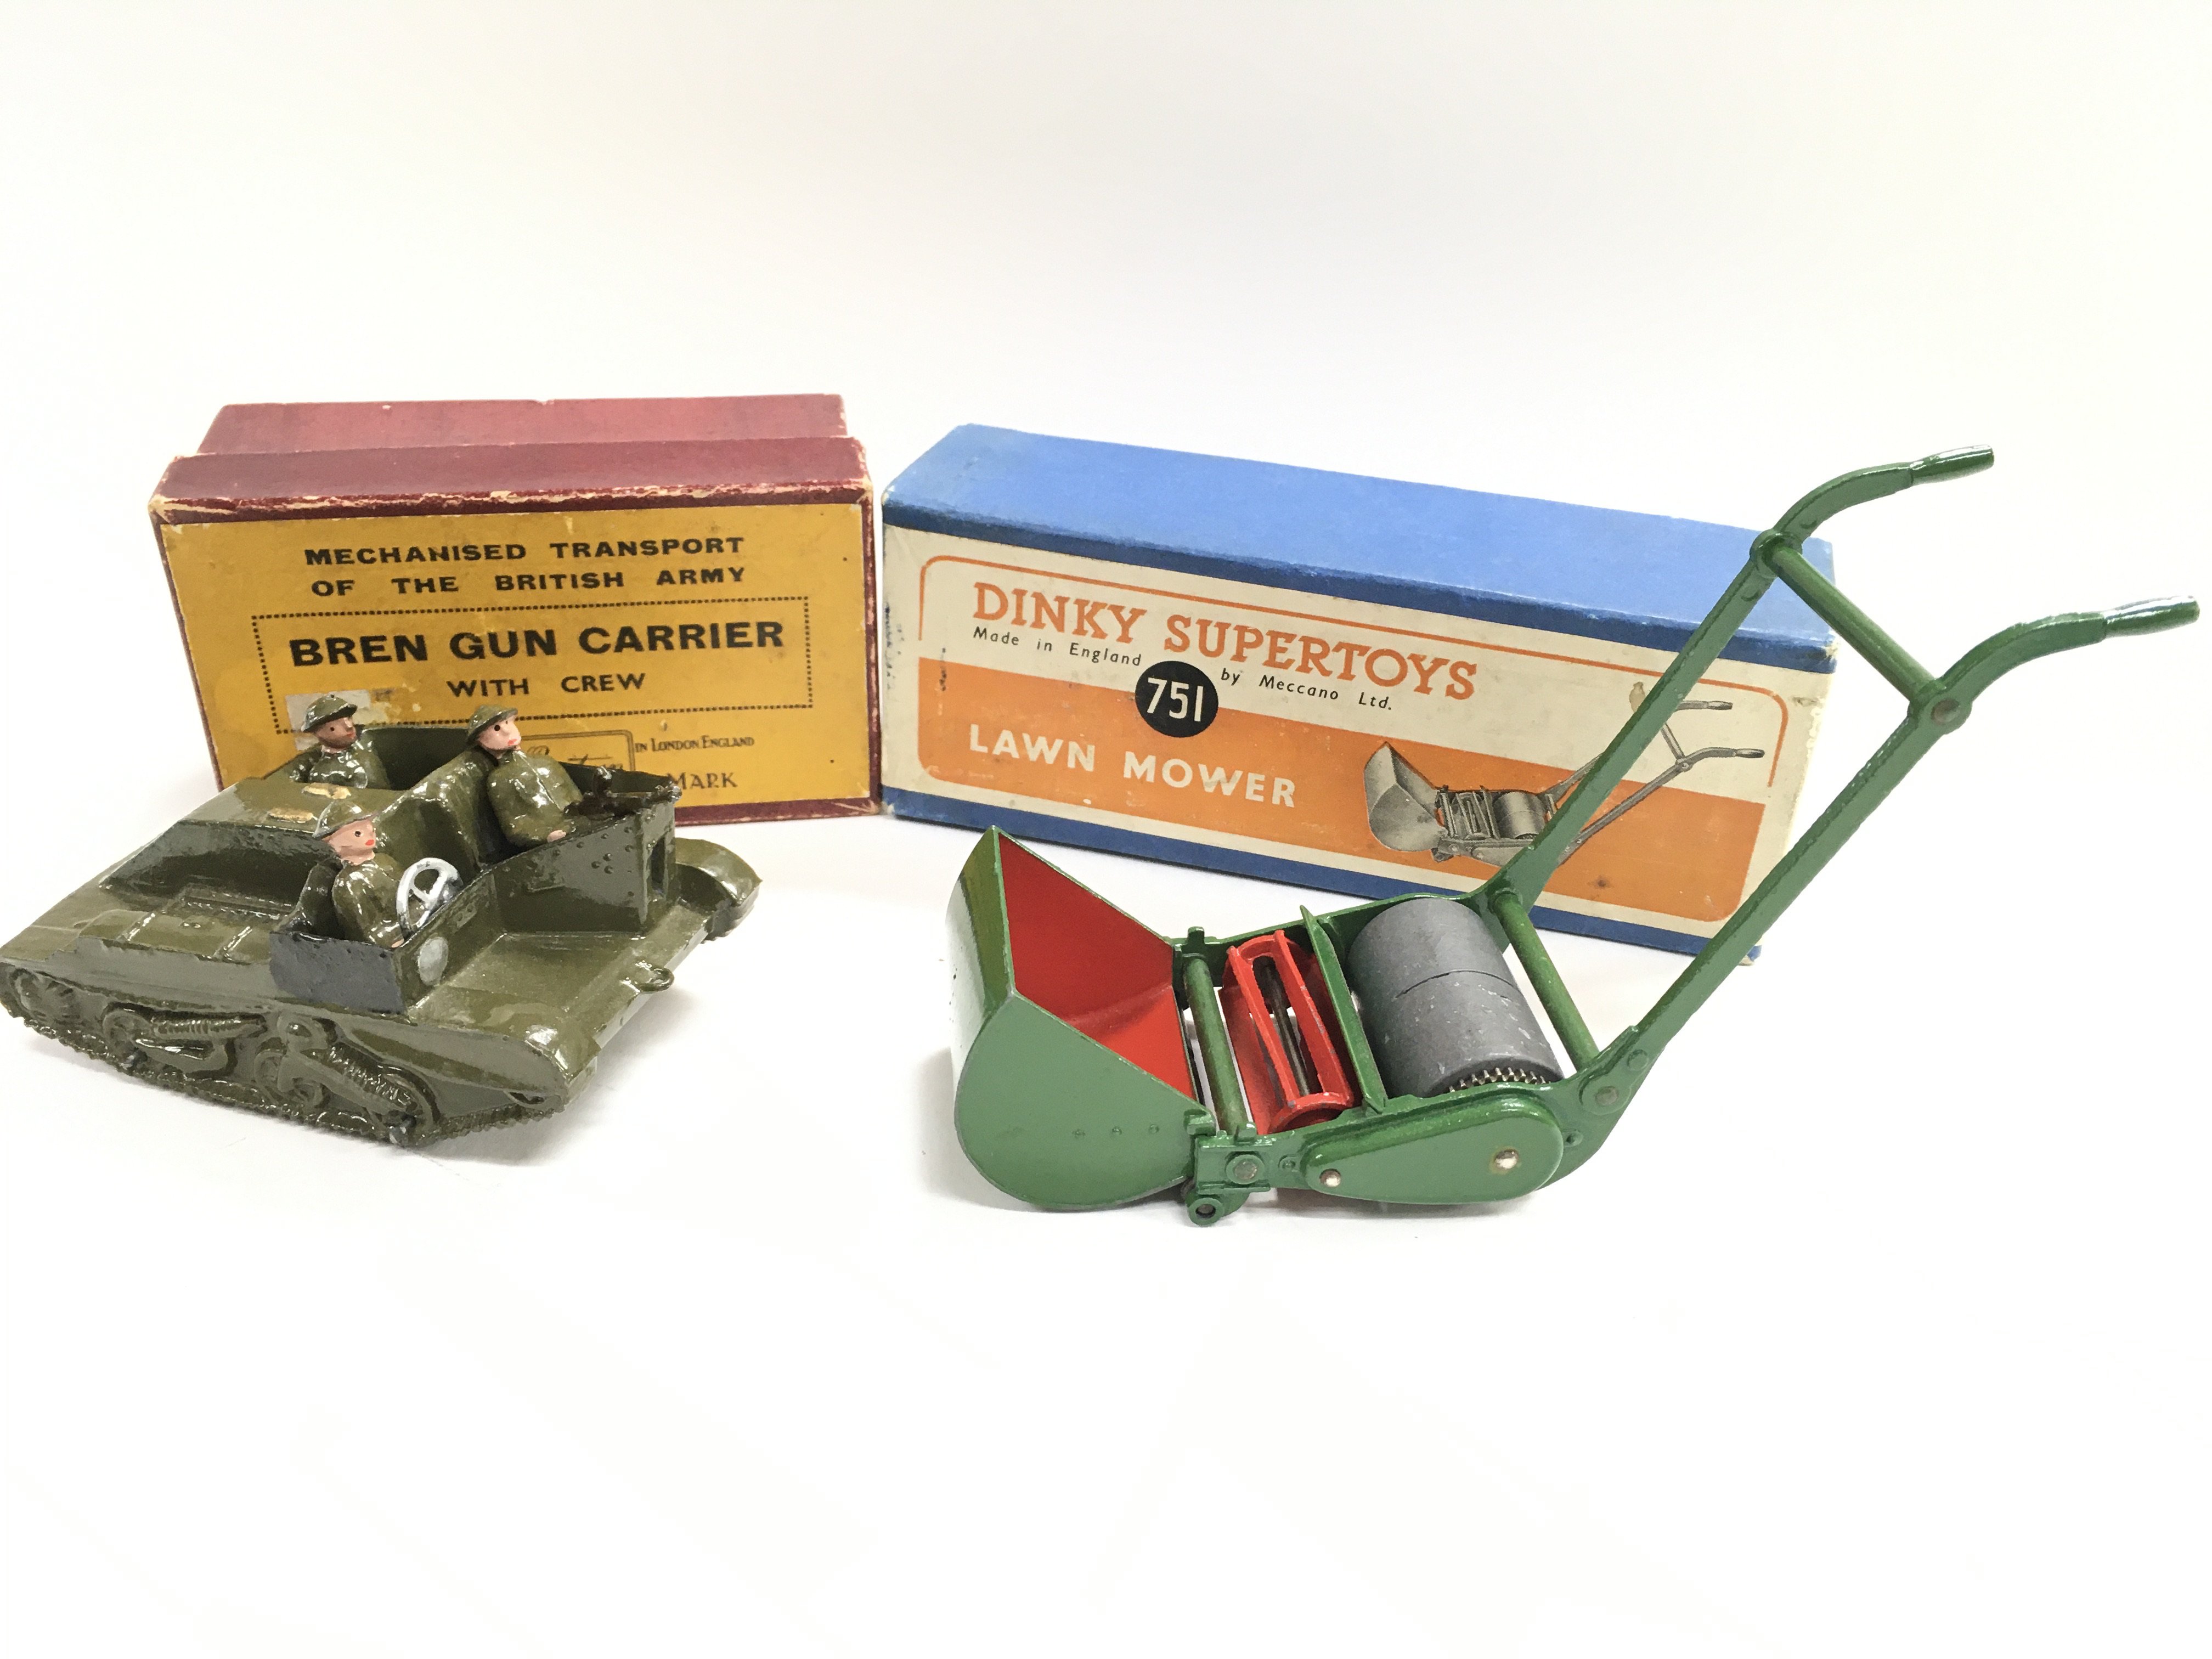 A Boxed Britains Bren Gun Carrier and a Dinky Lawn